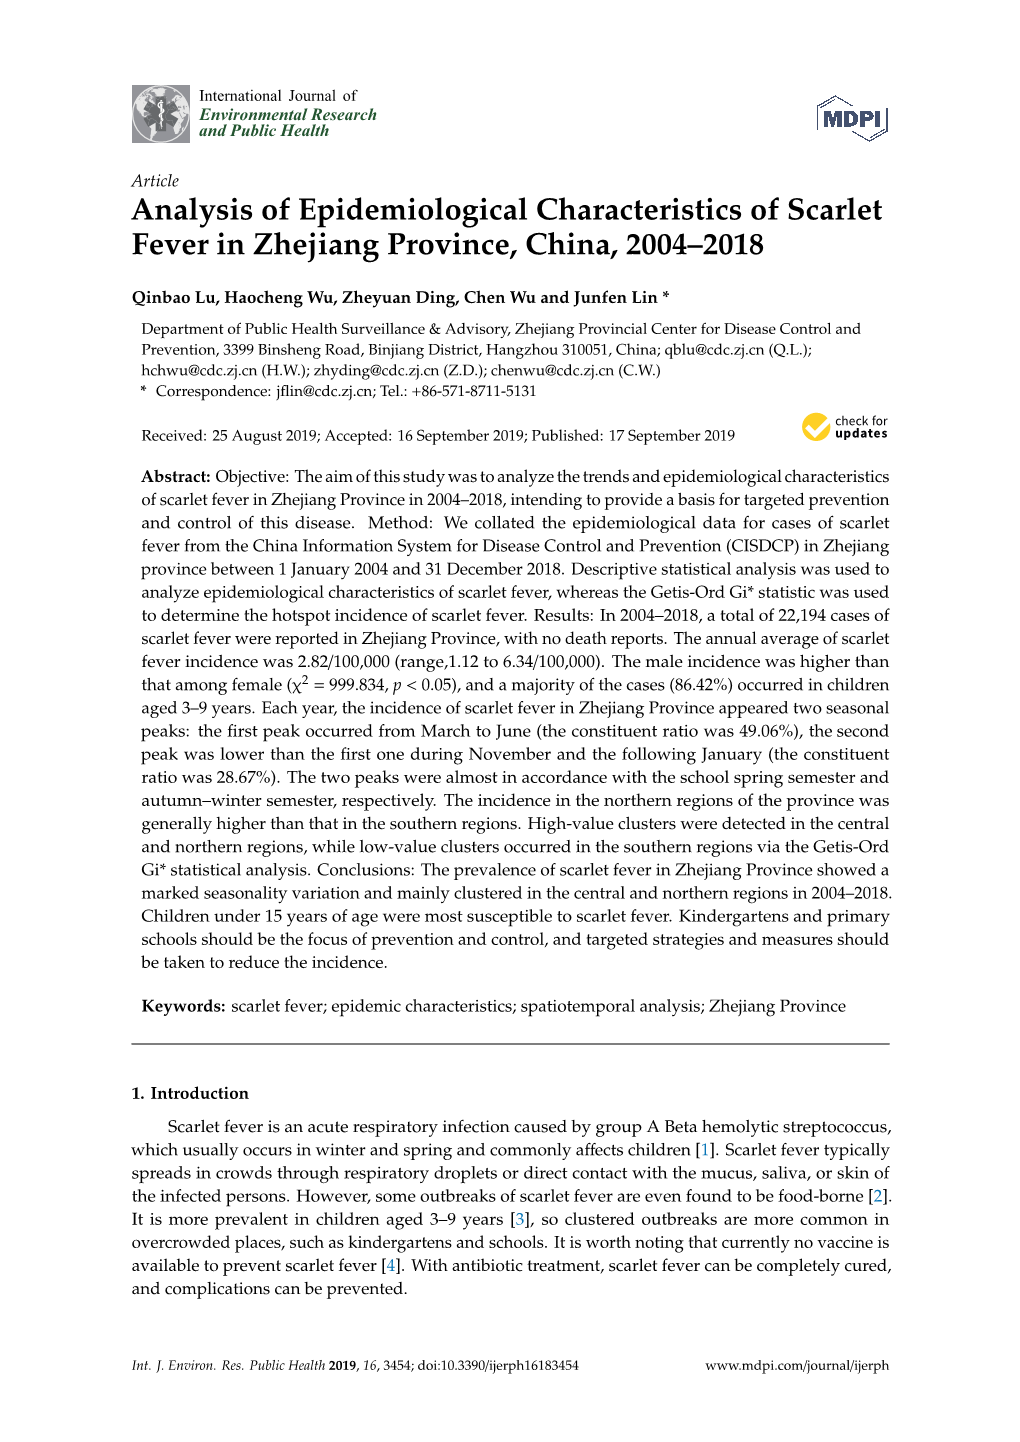 Analysis of Epidemiological Characteristics of Scarlet Fever in Zhejiang Province, China, 2004–2018